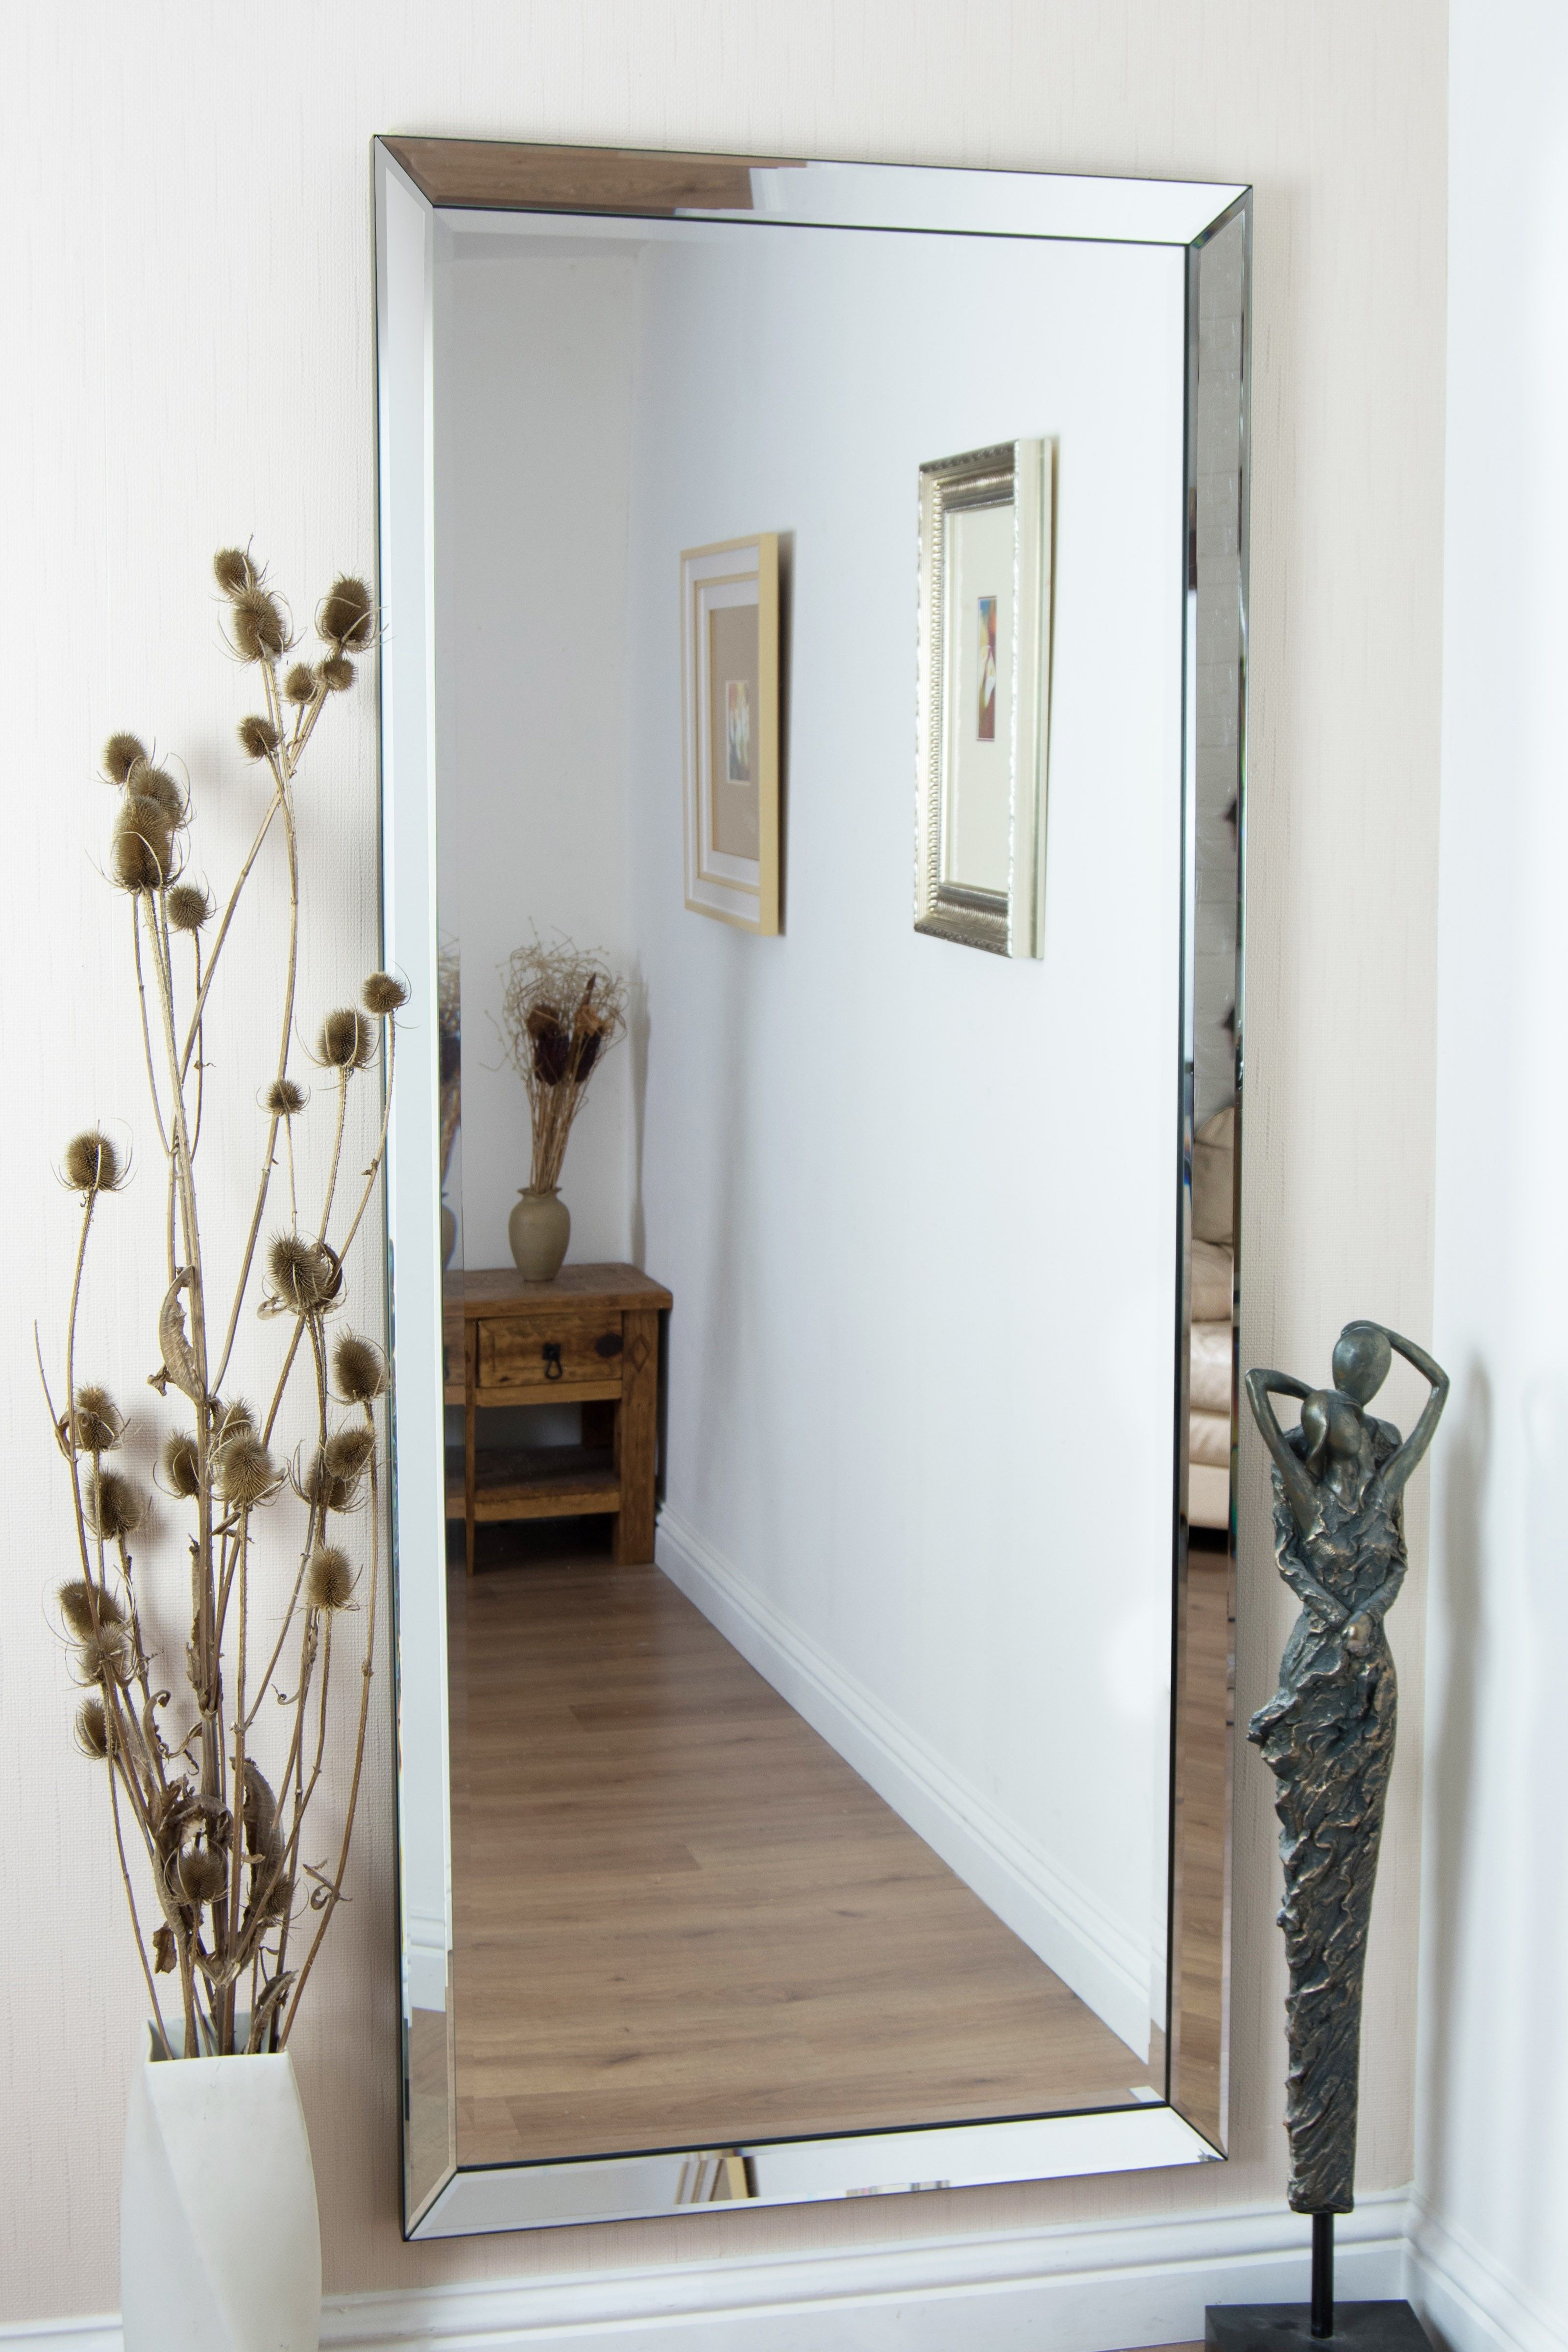 2023 Best of Wall Mirrors for Hallway